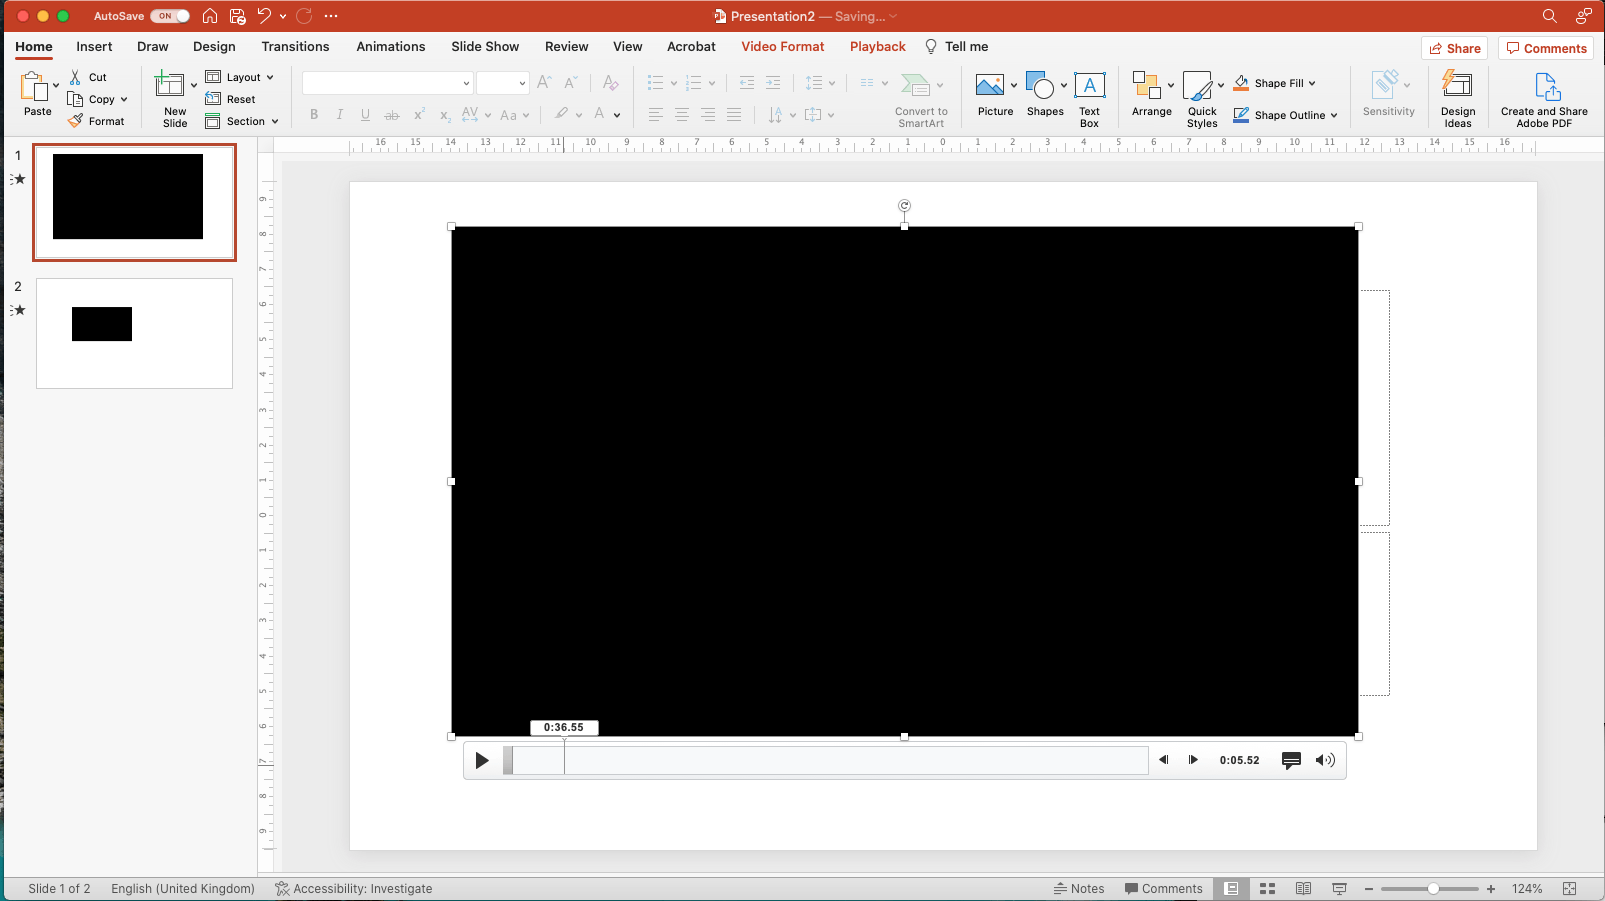 video in powerpoint won't play in presentation mode